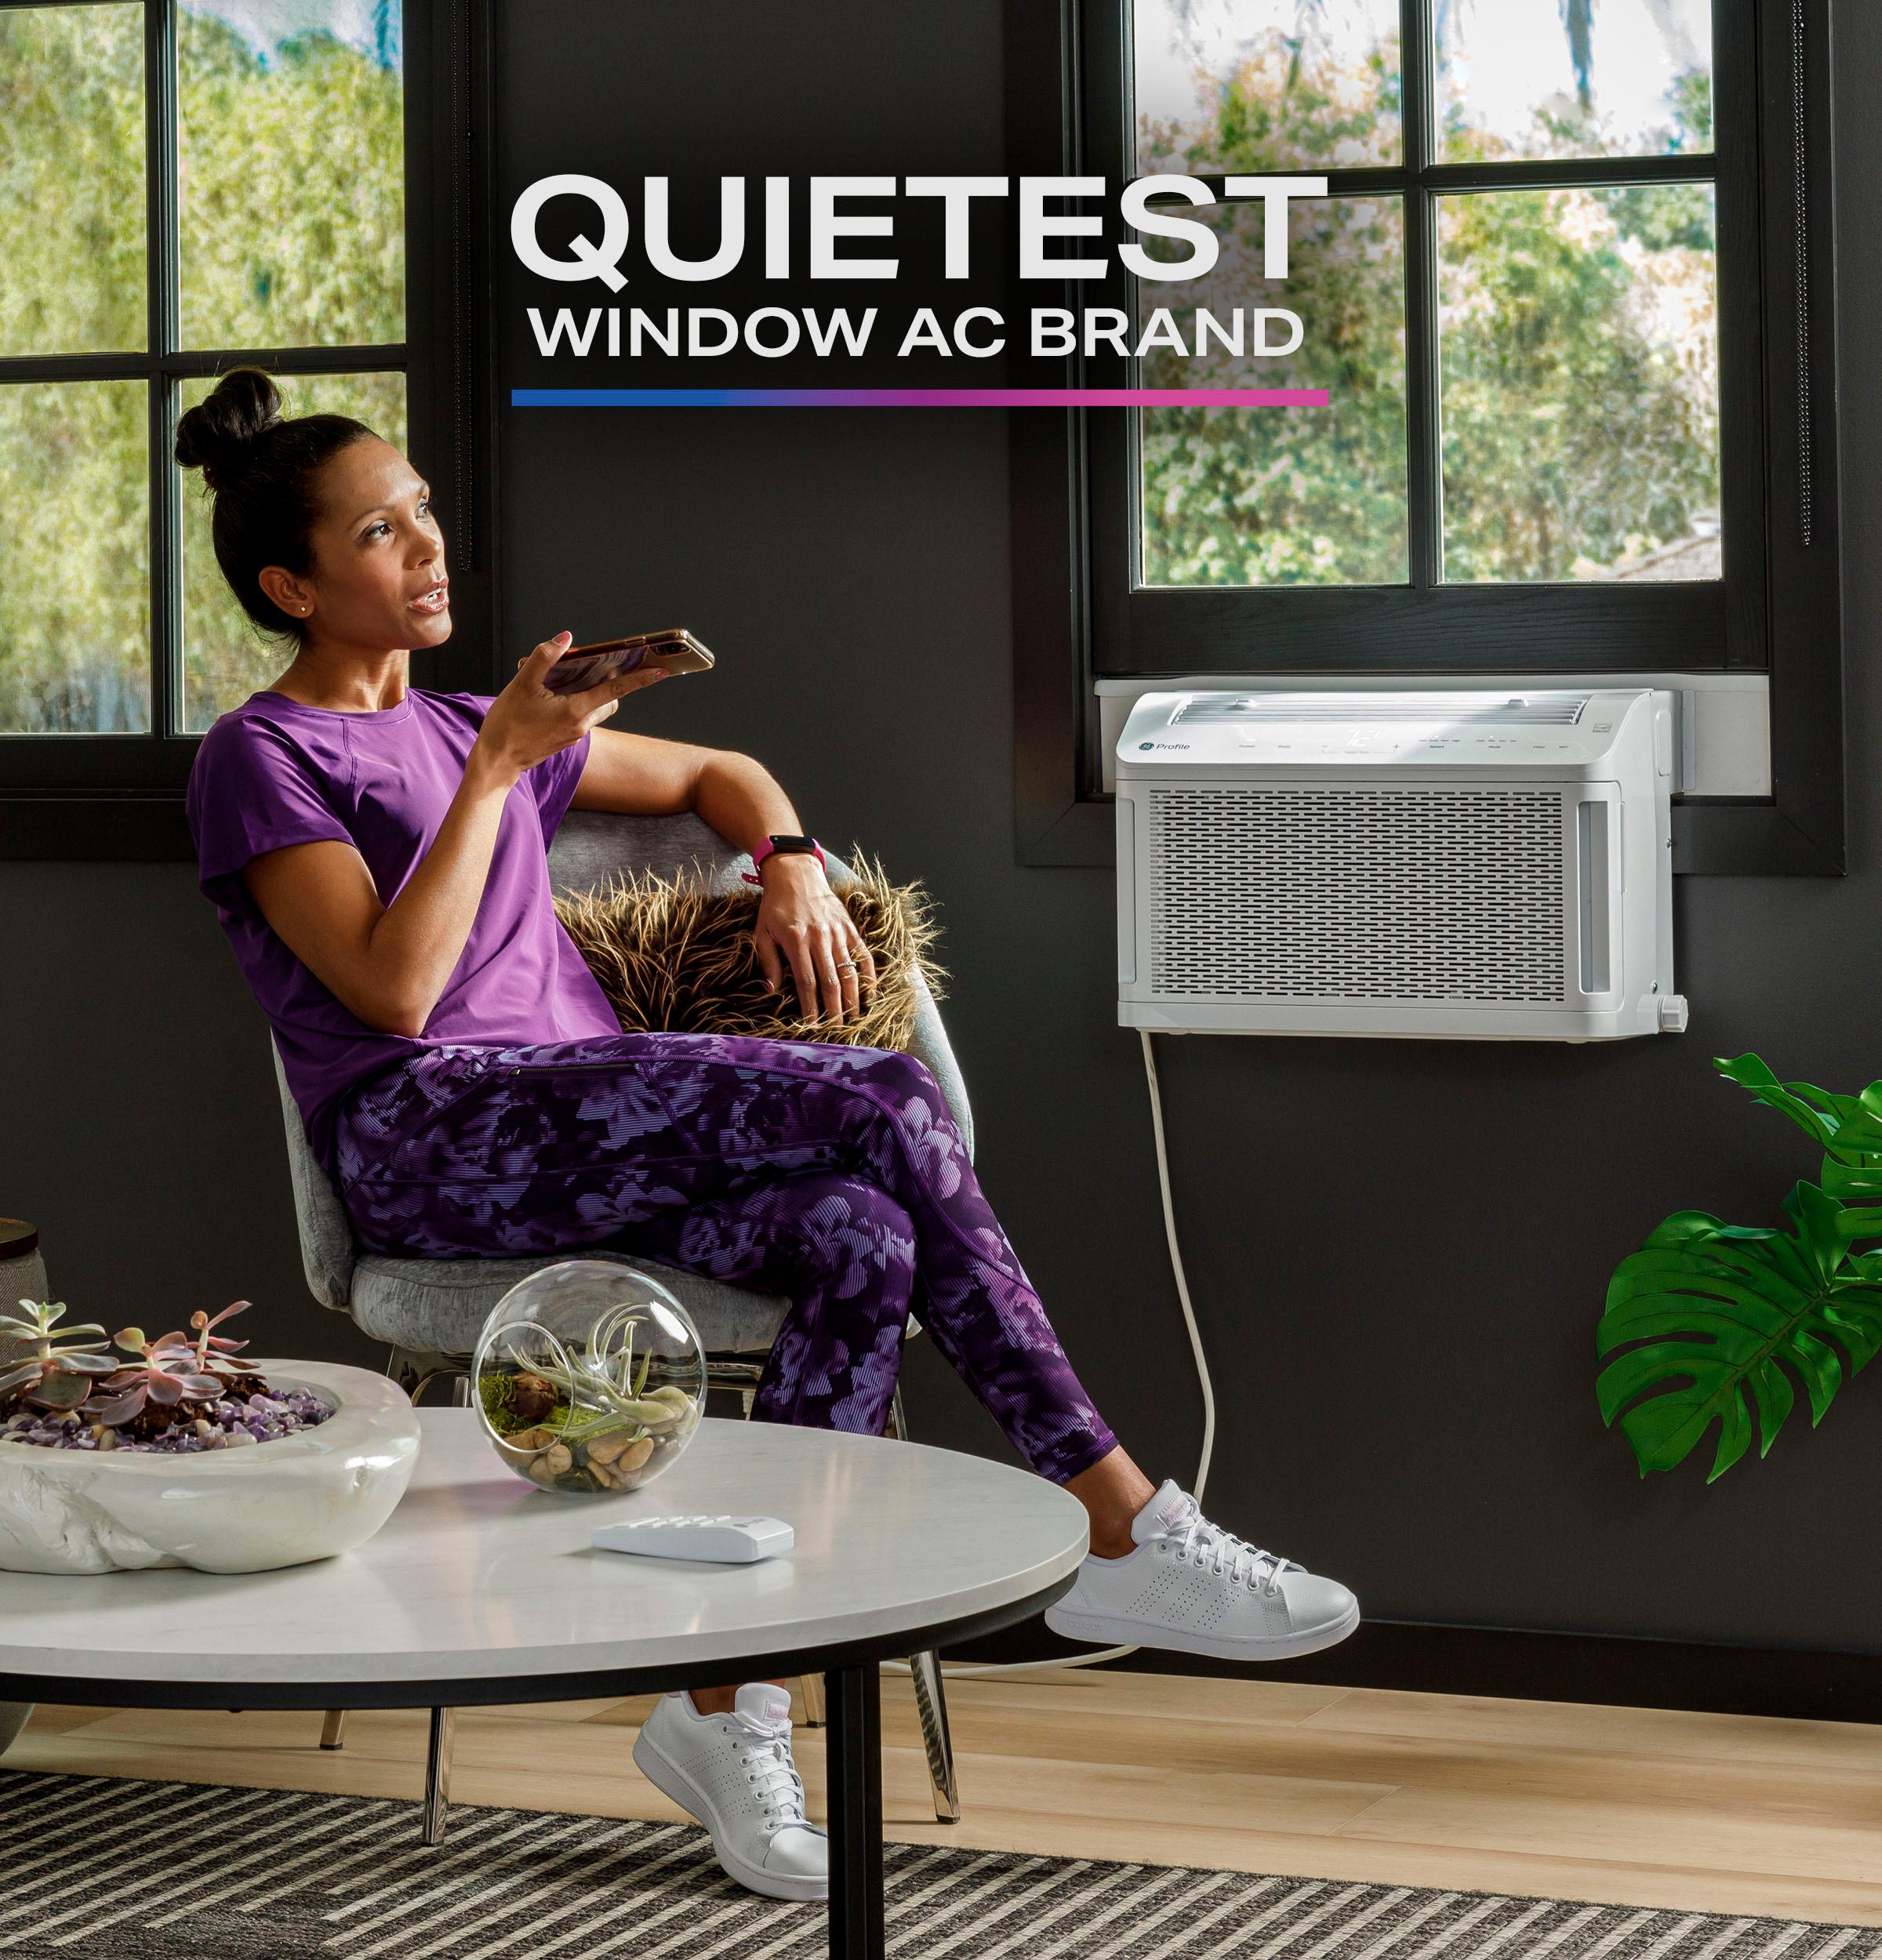 GE Profile ClearView™ 8,300 BTU Smart Ultra Quiet Window Air Conditioner for Medium Rooms up to 350 sq. ft.